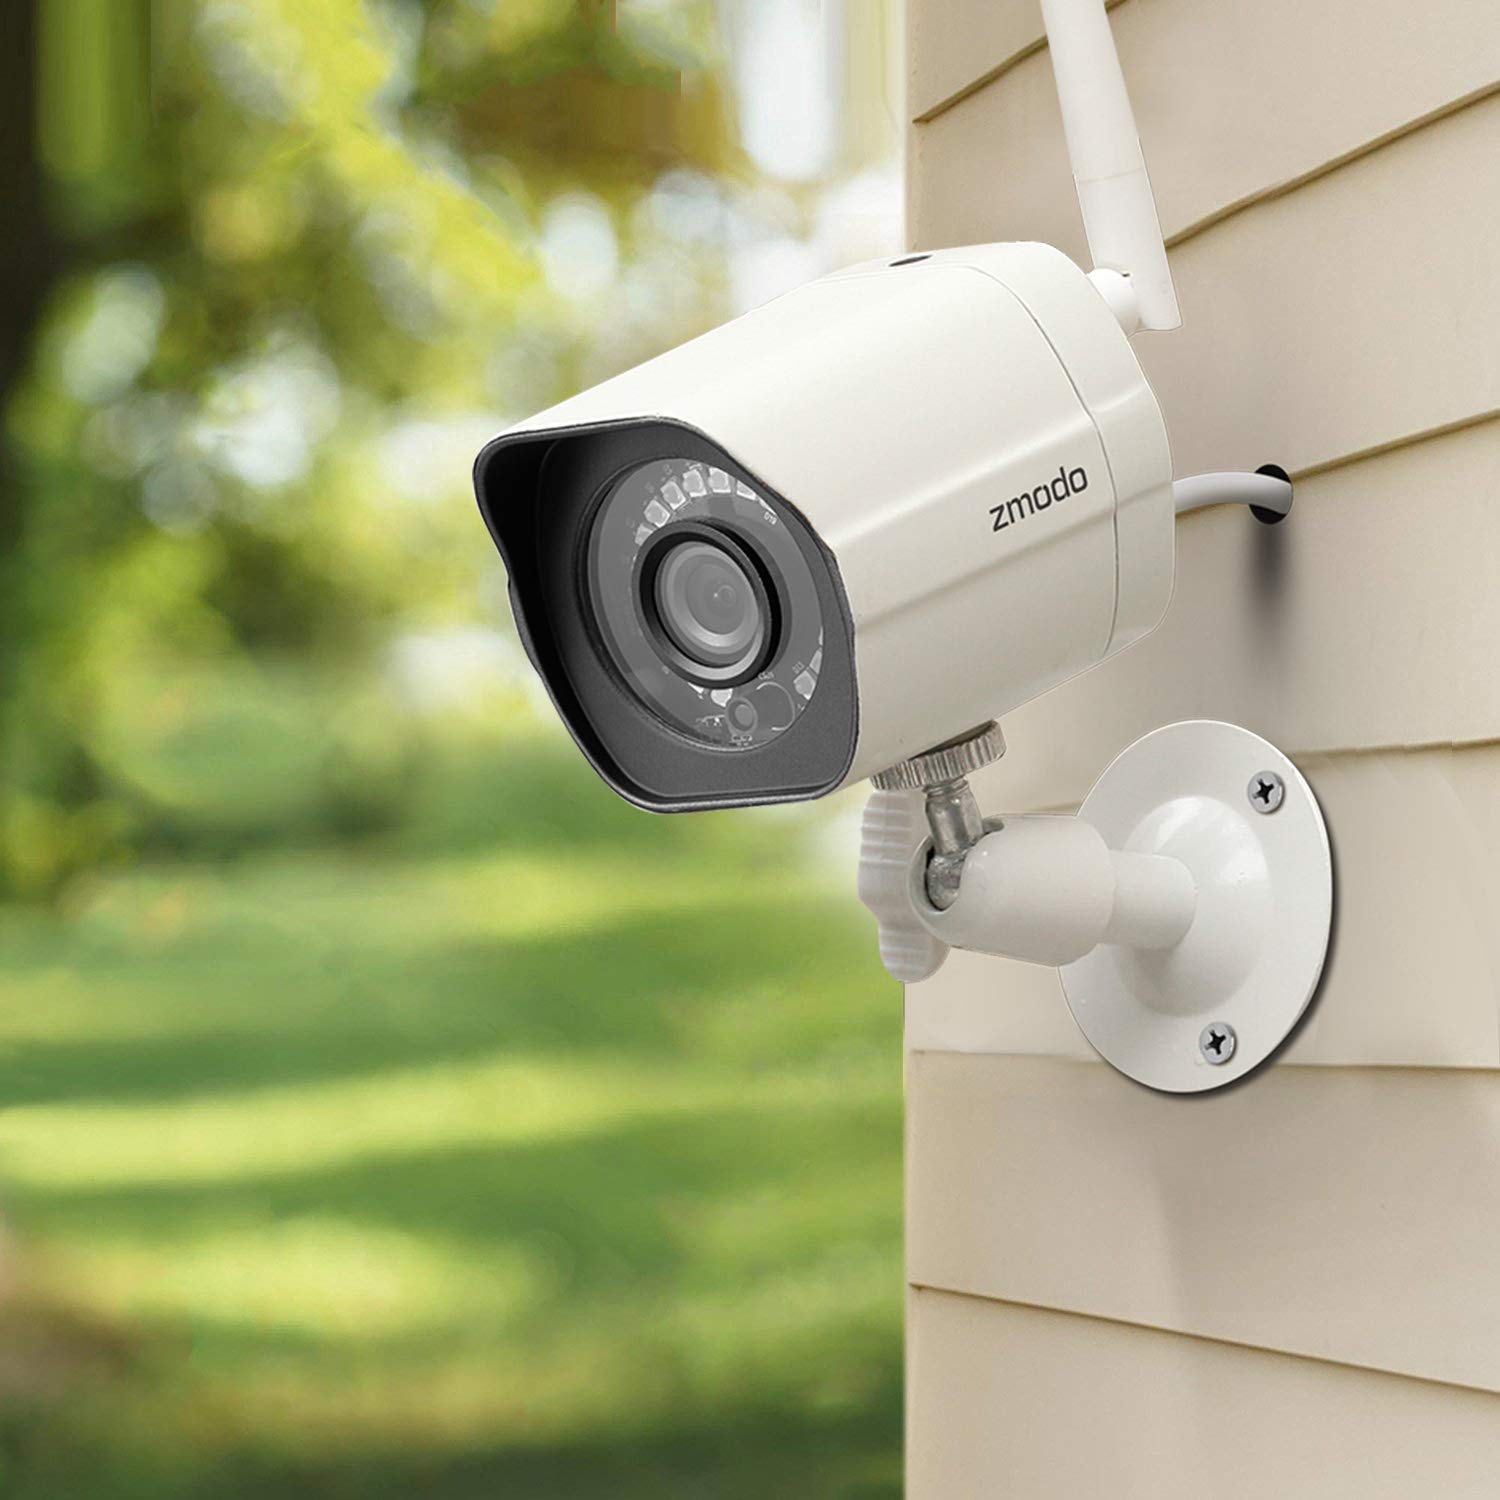 High resolution Night Vision security camera for homeowners